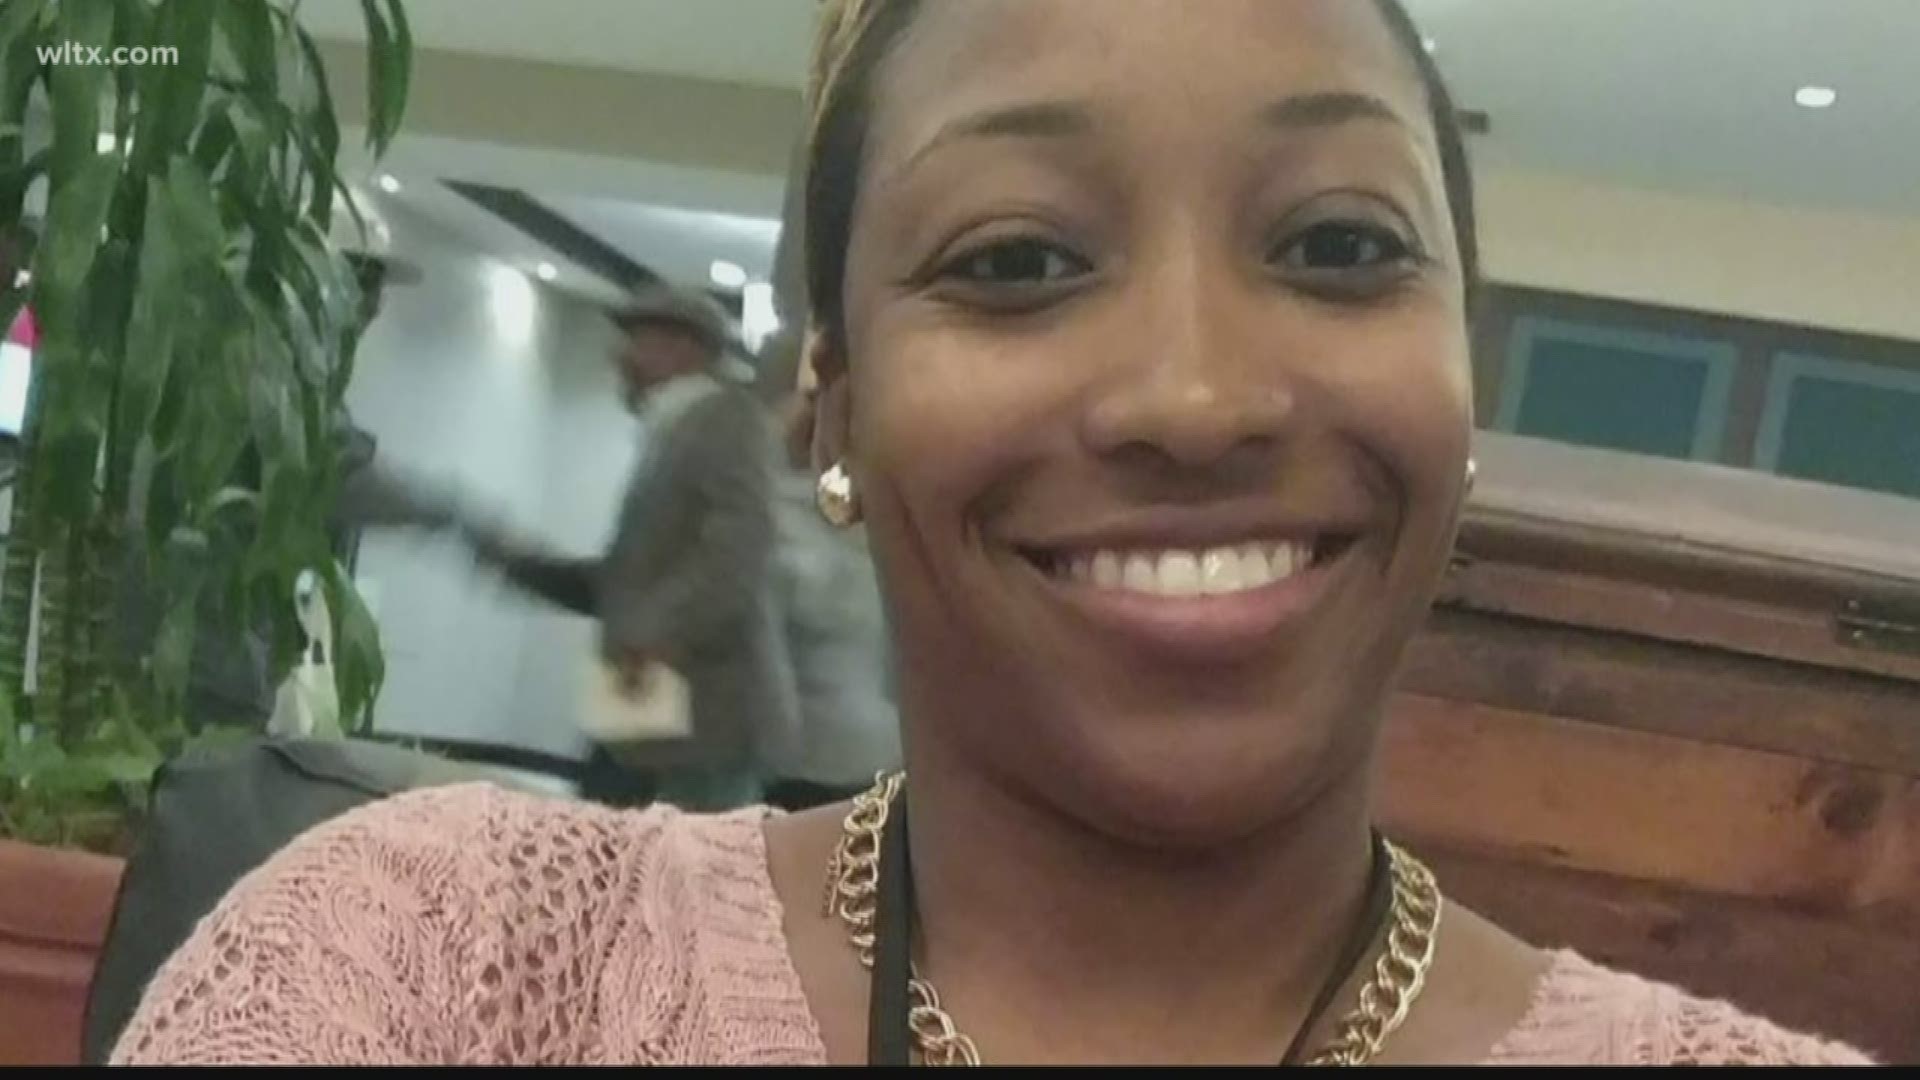 Family members say law enforcement became her calling, along with helping victims of domestic violence and youngsters who got a rough start in life.